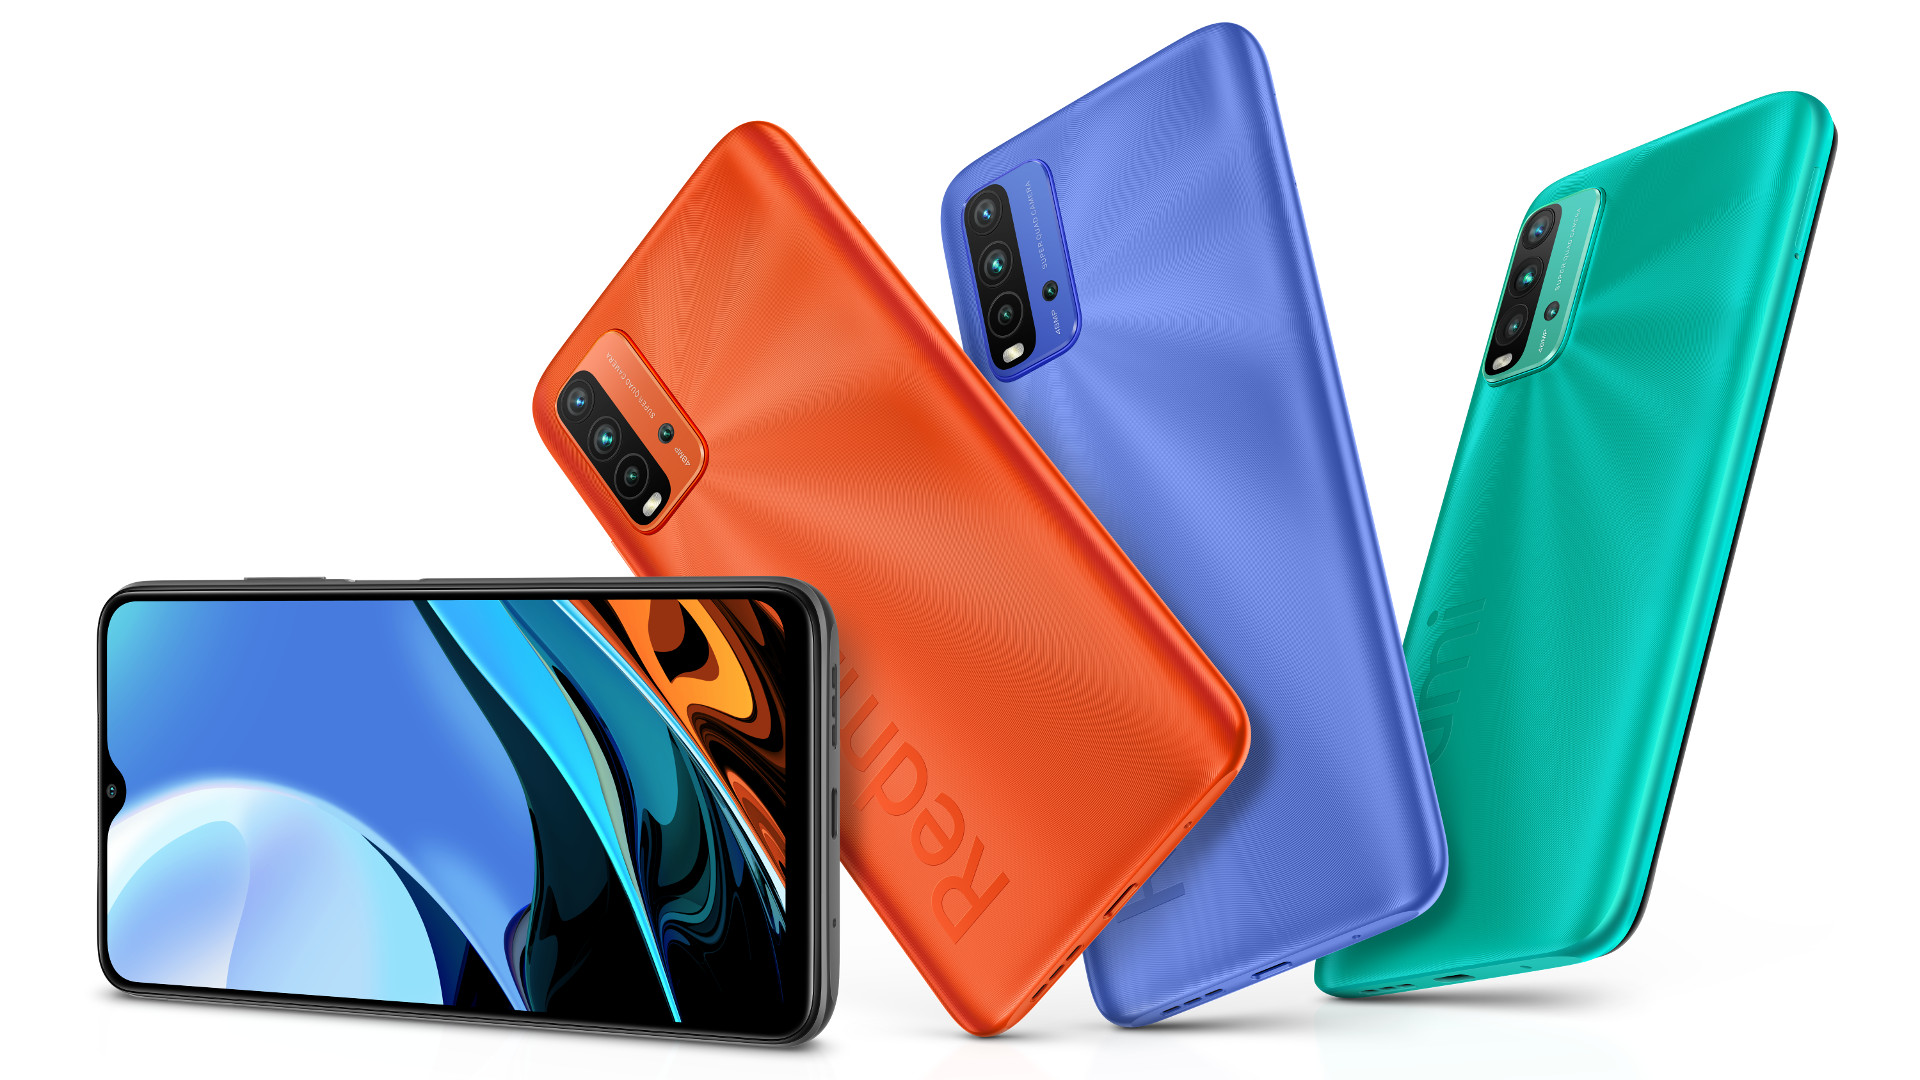 Redmi 9T: Should you buy it, and what are the alternatives?